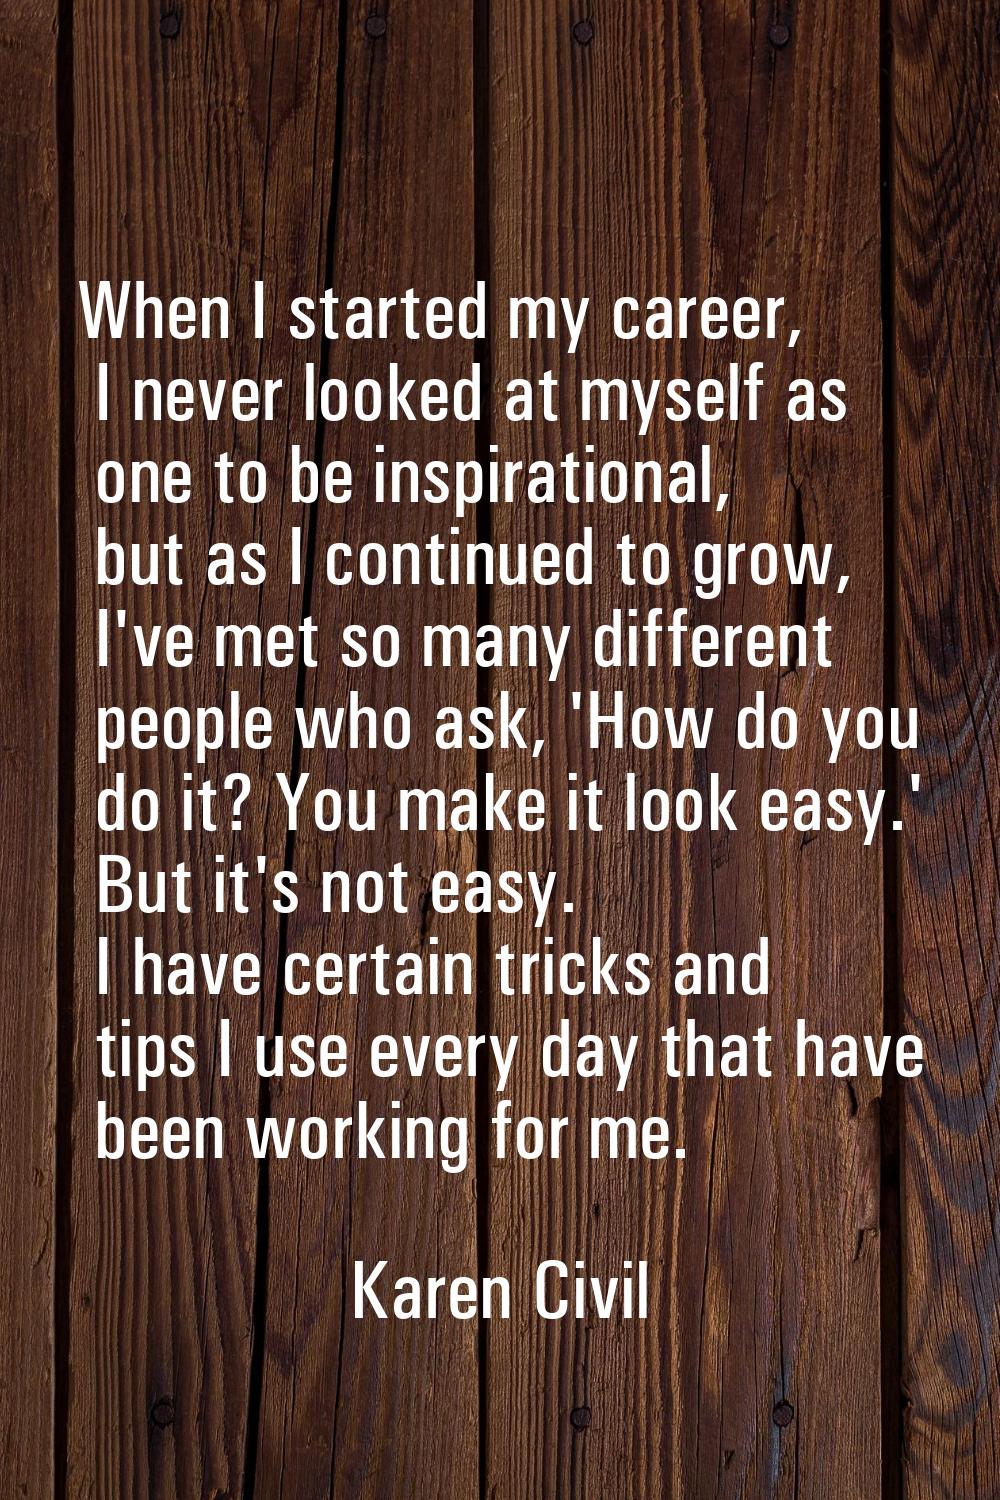 When I started my career, I never looked at myself as one to be inspirational, but as I continued t